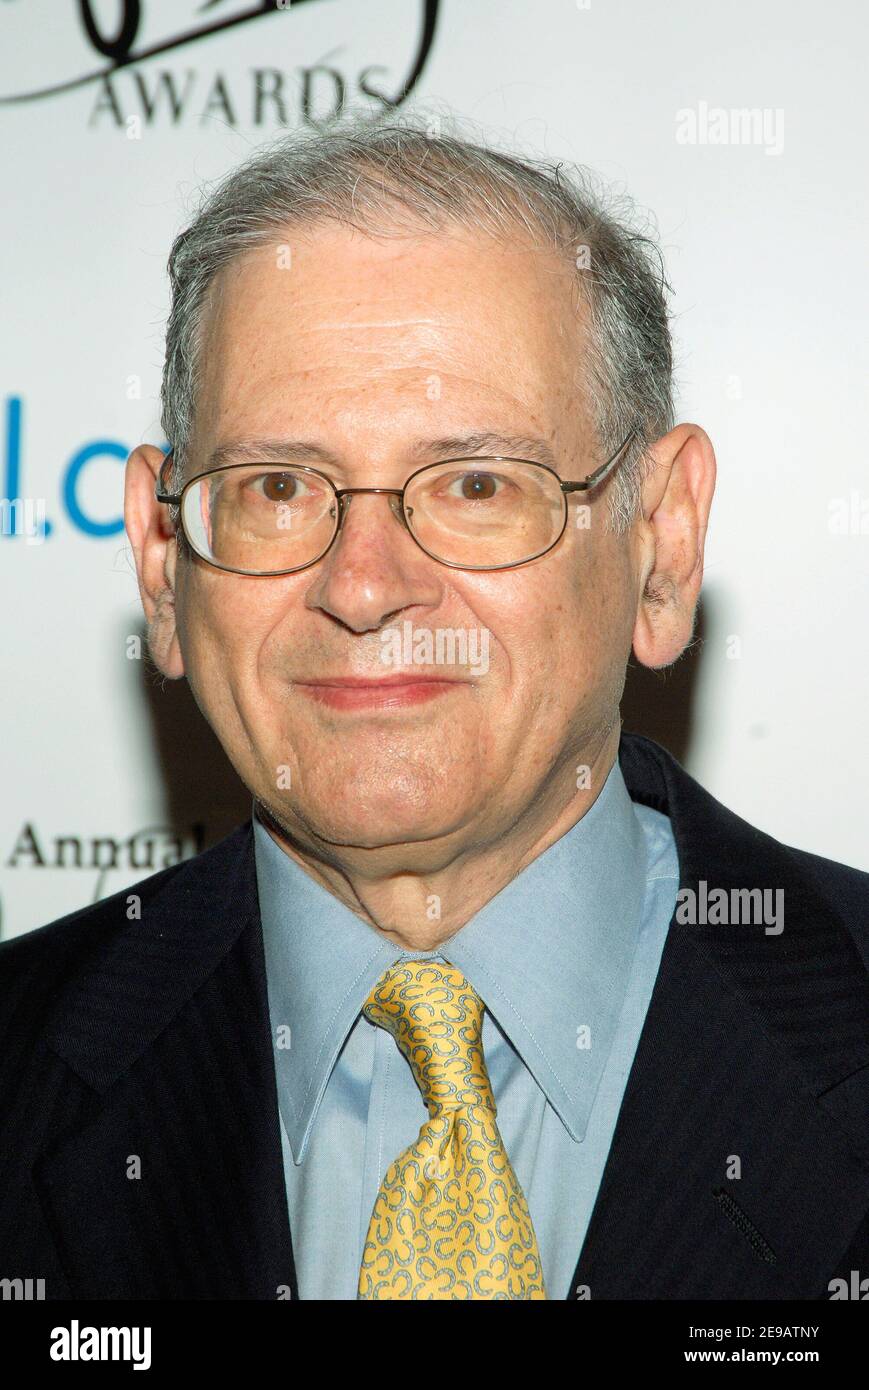 Dr. Robert Kahn attends the 10th Annual Webby Awards held at Cipriani Wall Street on June 12, 2006 in New York City, New York, USA. Photo by Gregorio Binuya/ABACAPRESS.COM Stock Photo